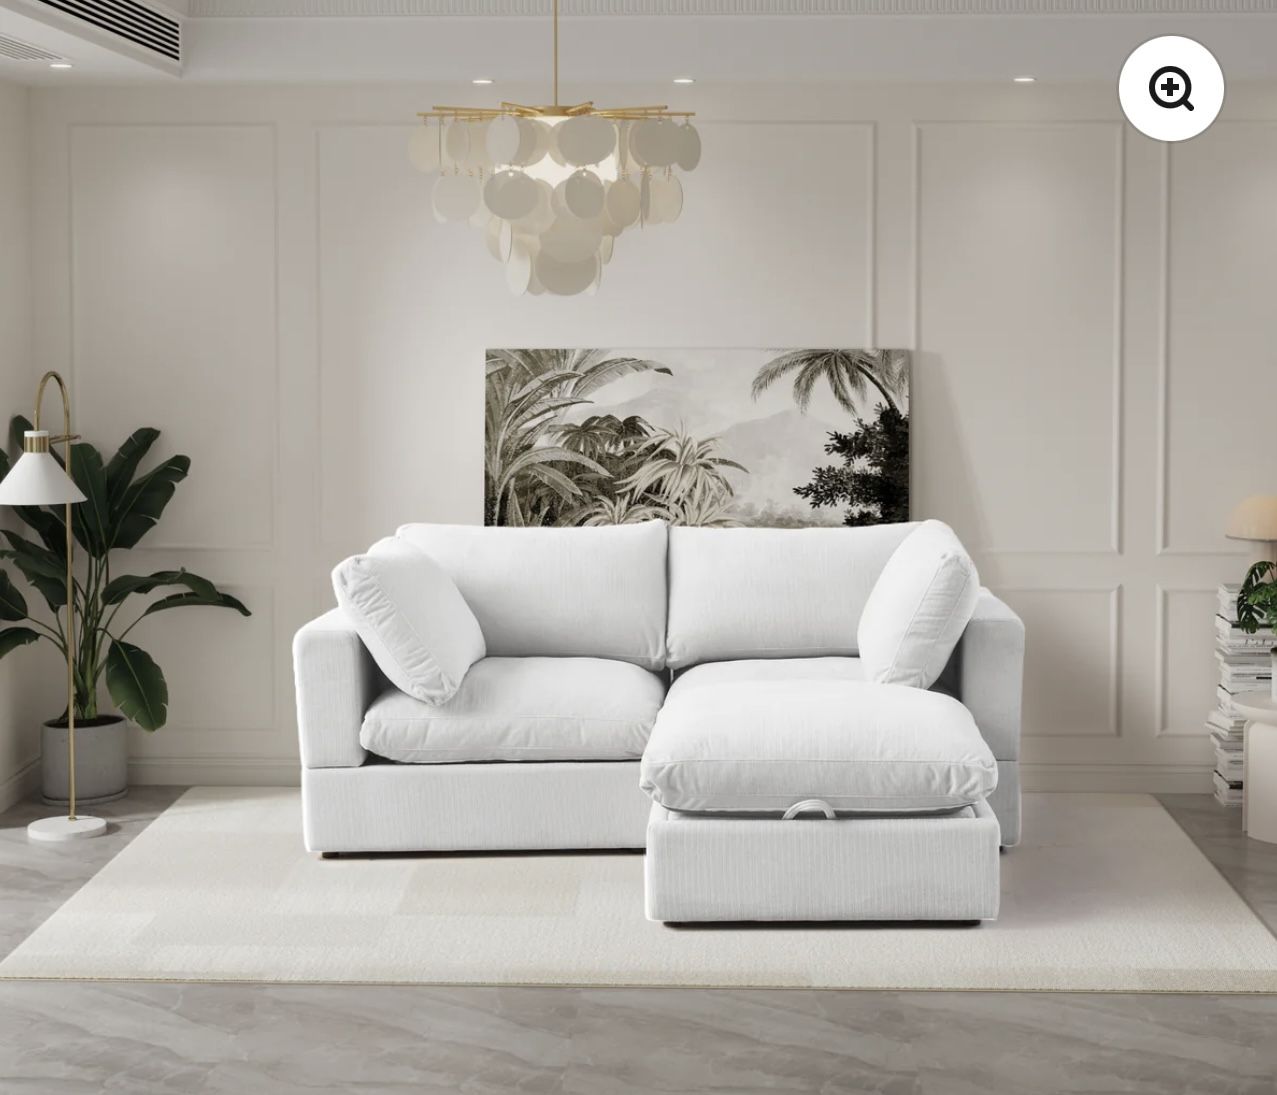 White Cloud Couch Sectional FREE DELIVERY 🚚 3 Piece Set